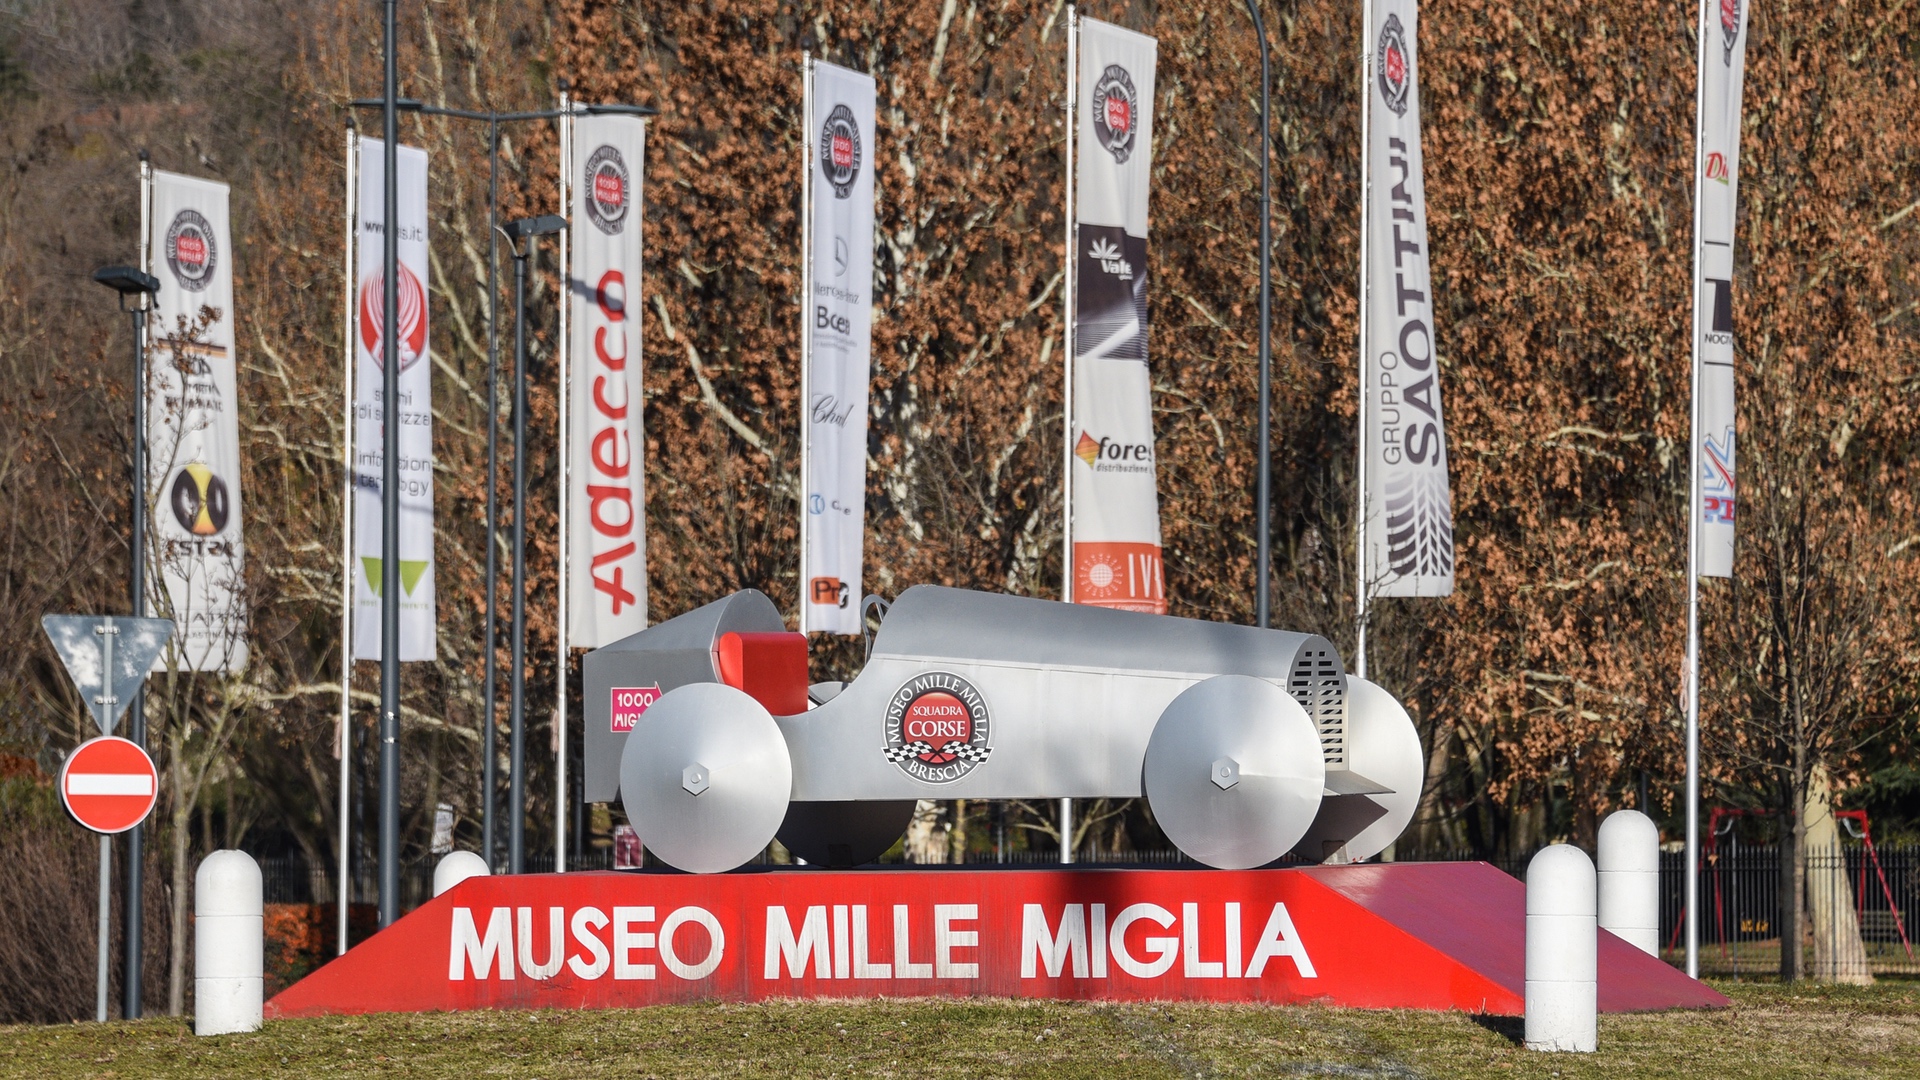 Sign and sculpture outside Mille Miglia Museum